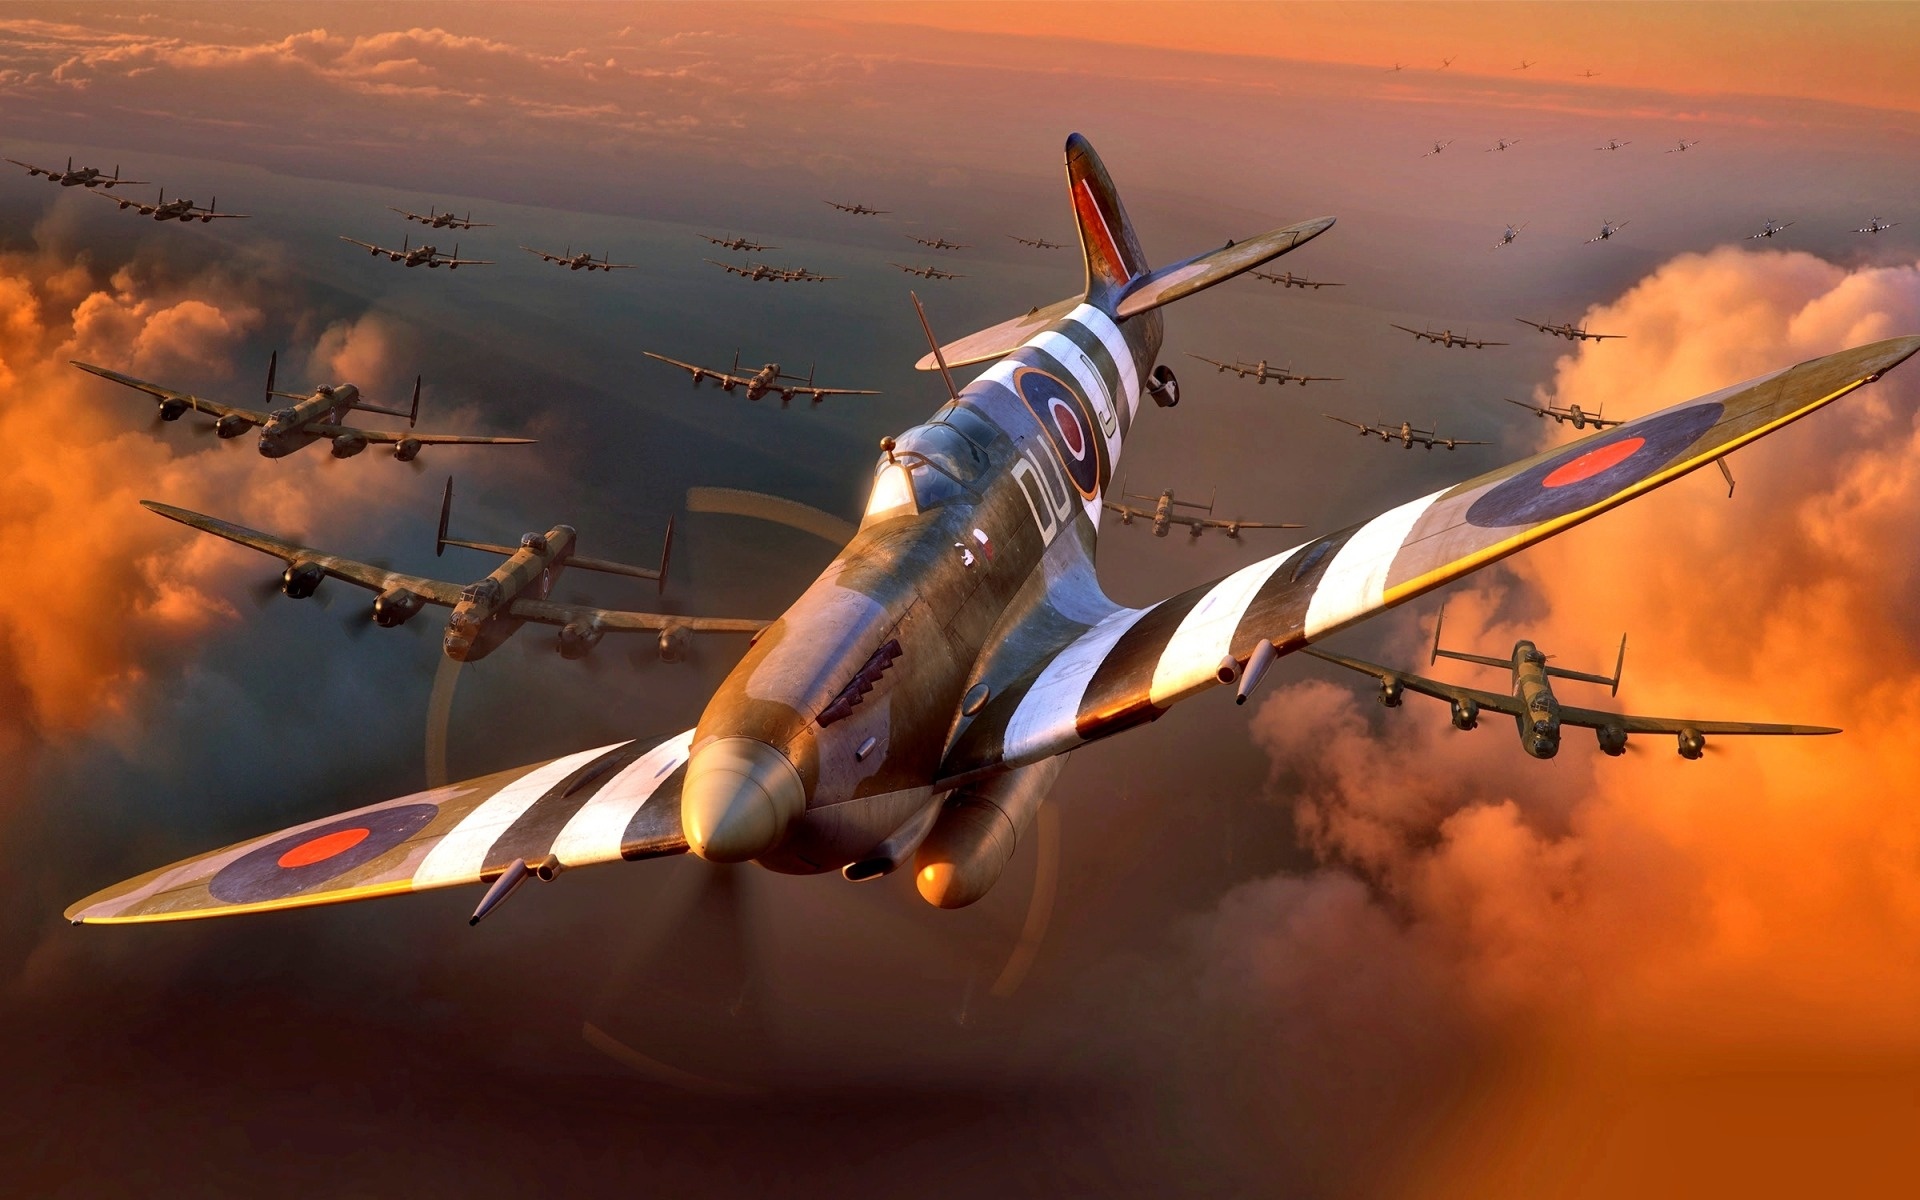 Spitfire wallpapers, British fighter, WWII squadron, High-quality HD pictures, 1920x1200 HD Desktop